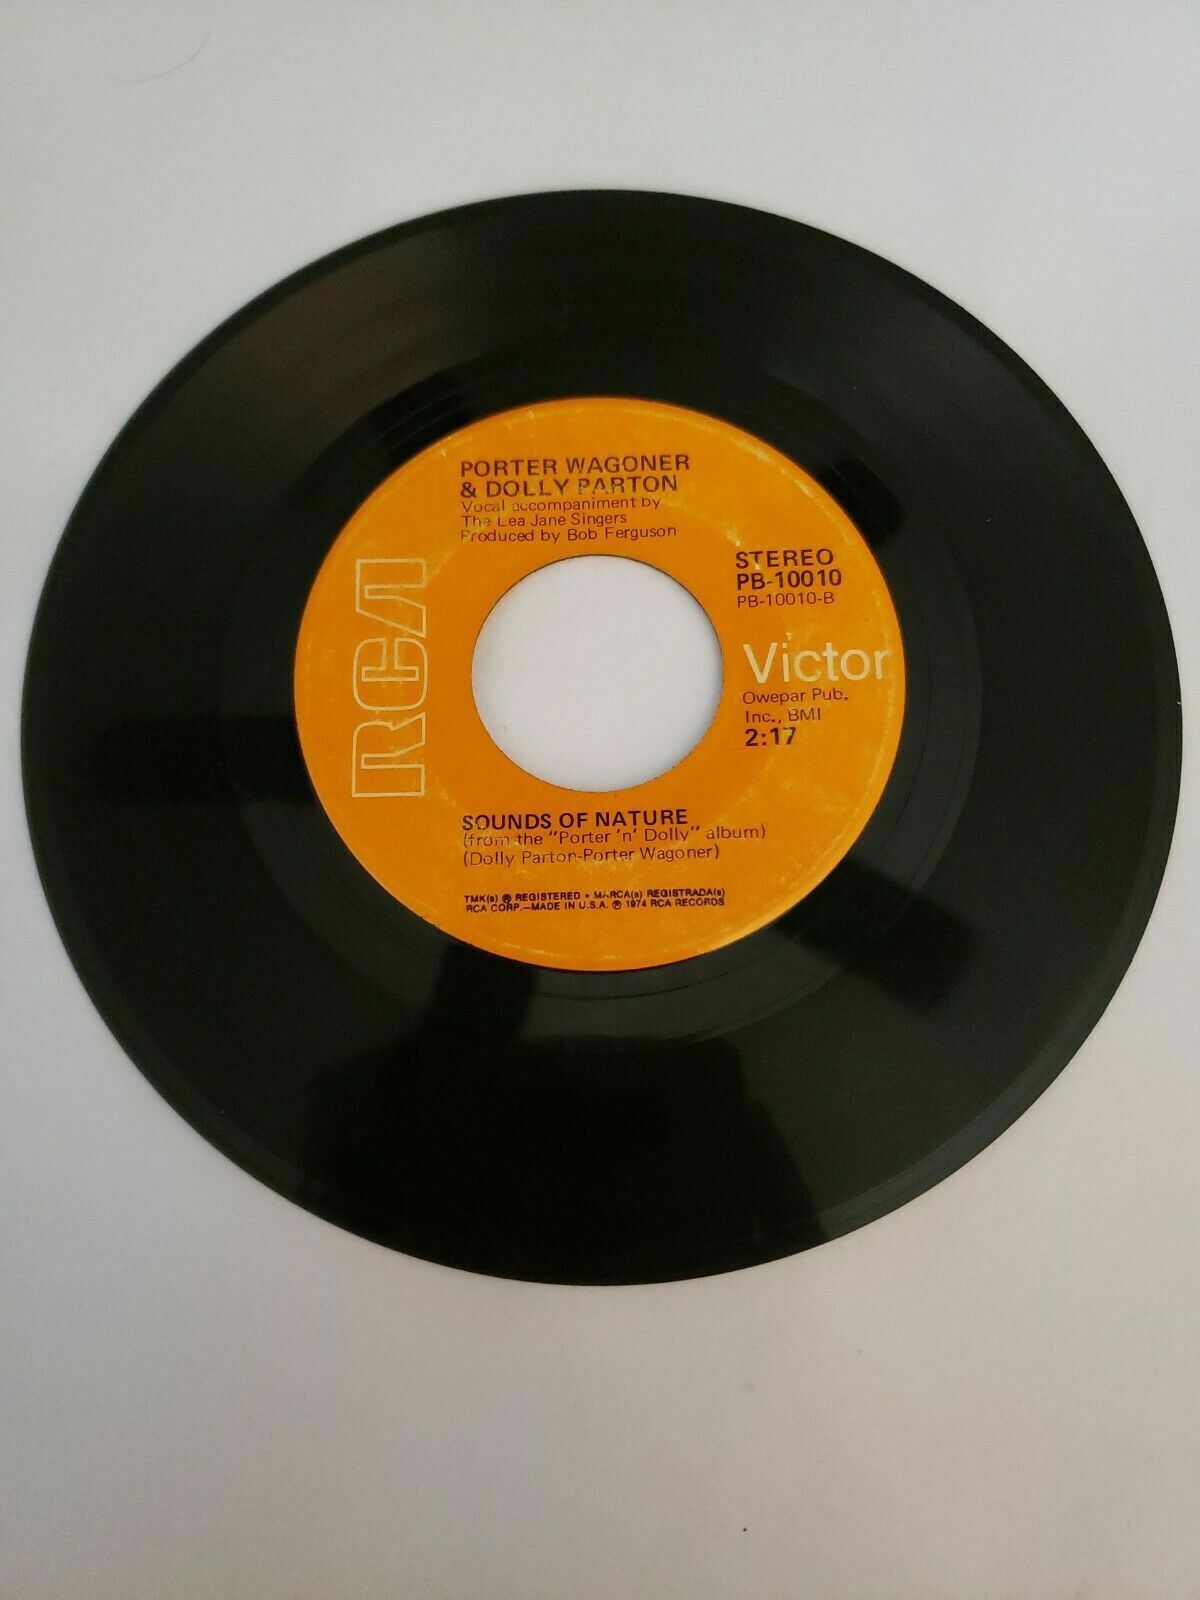 Porter Wagoner and Dolly Parton - Sounds of Nature - RCA(45RPM 7”Single)(J556) 